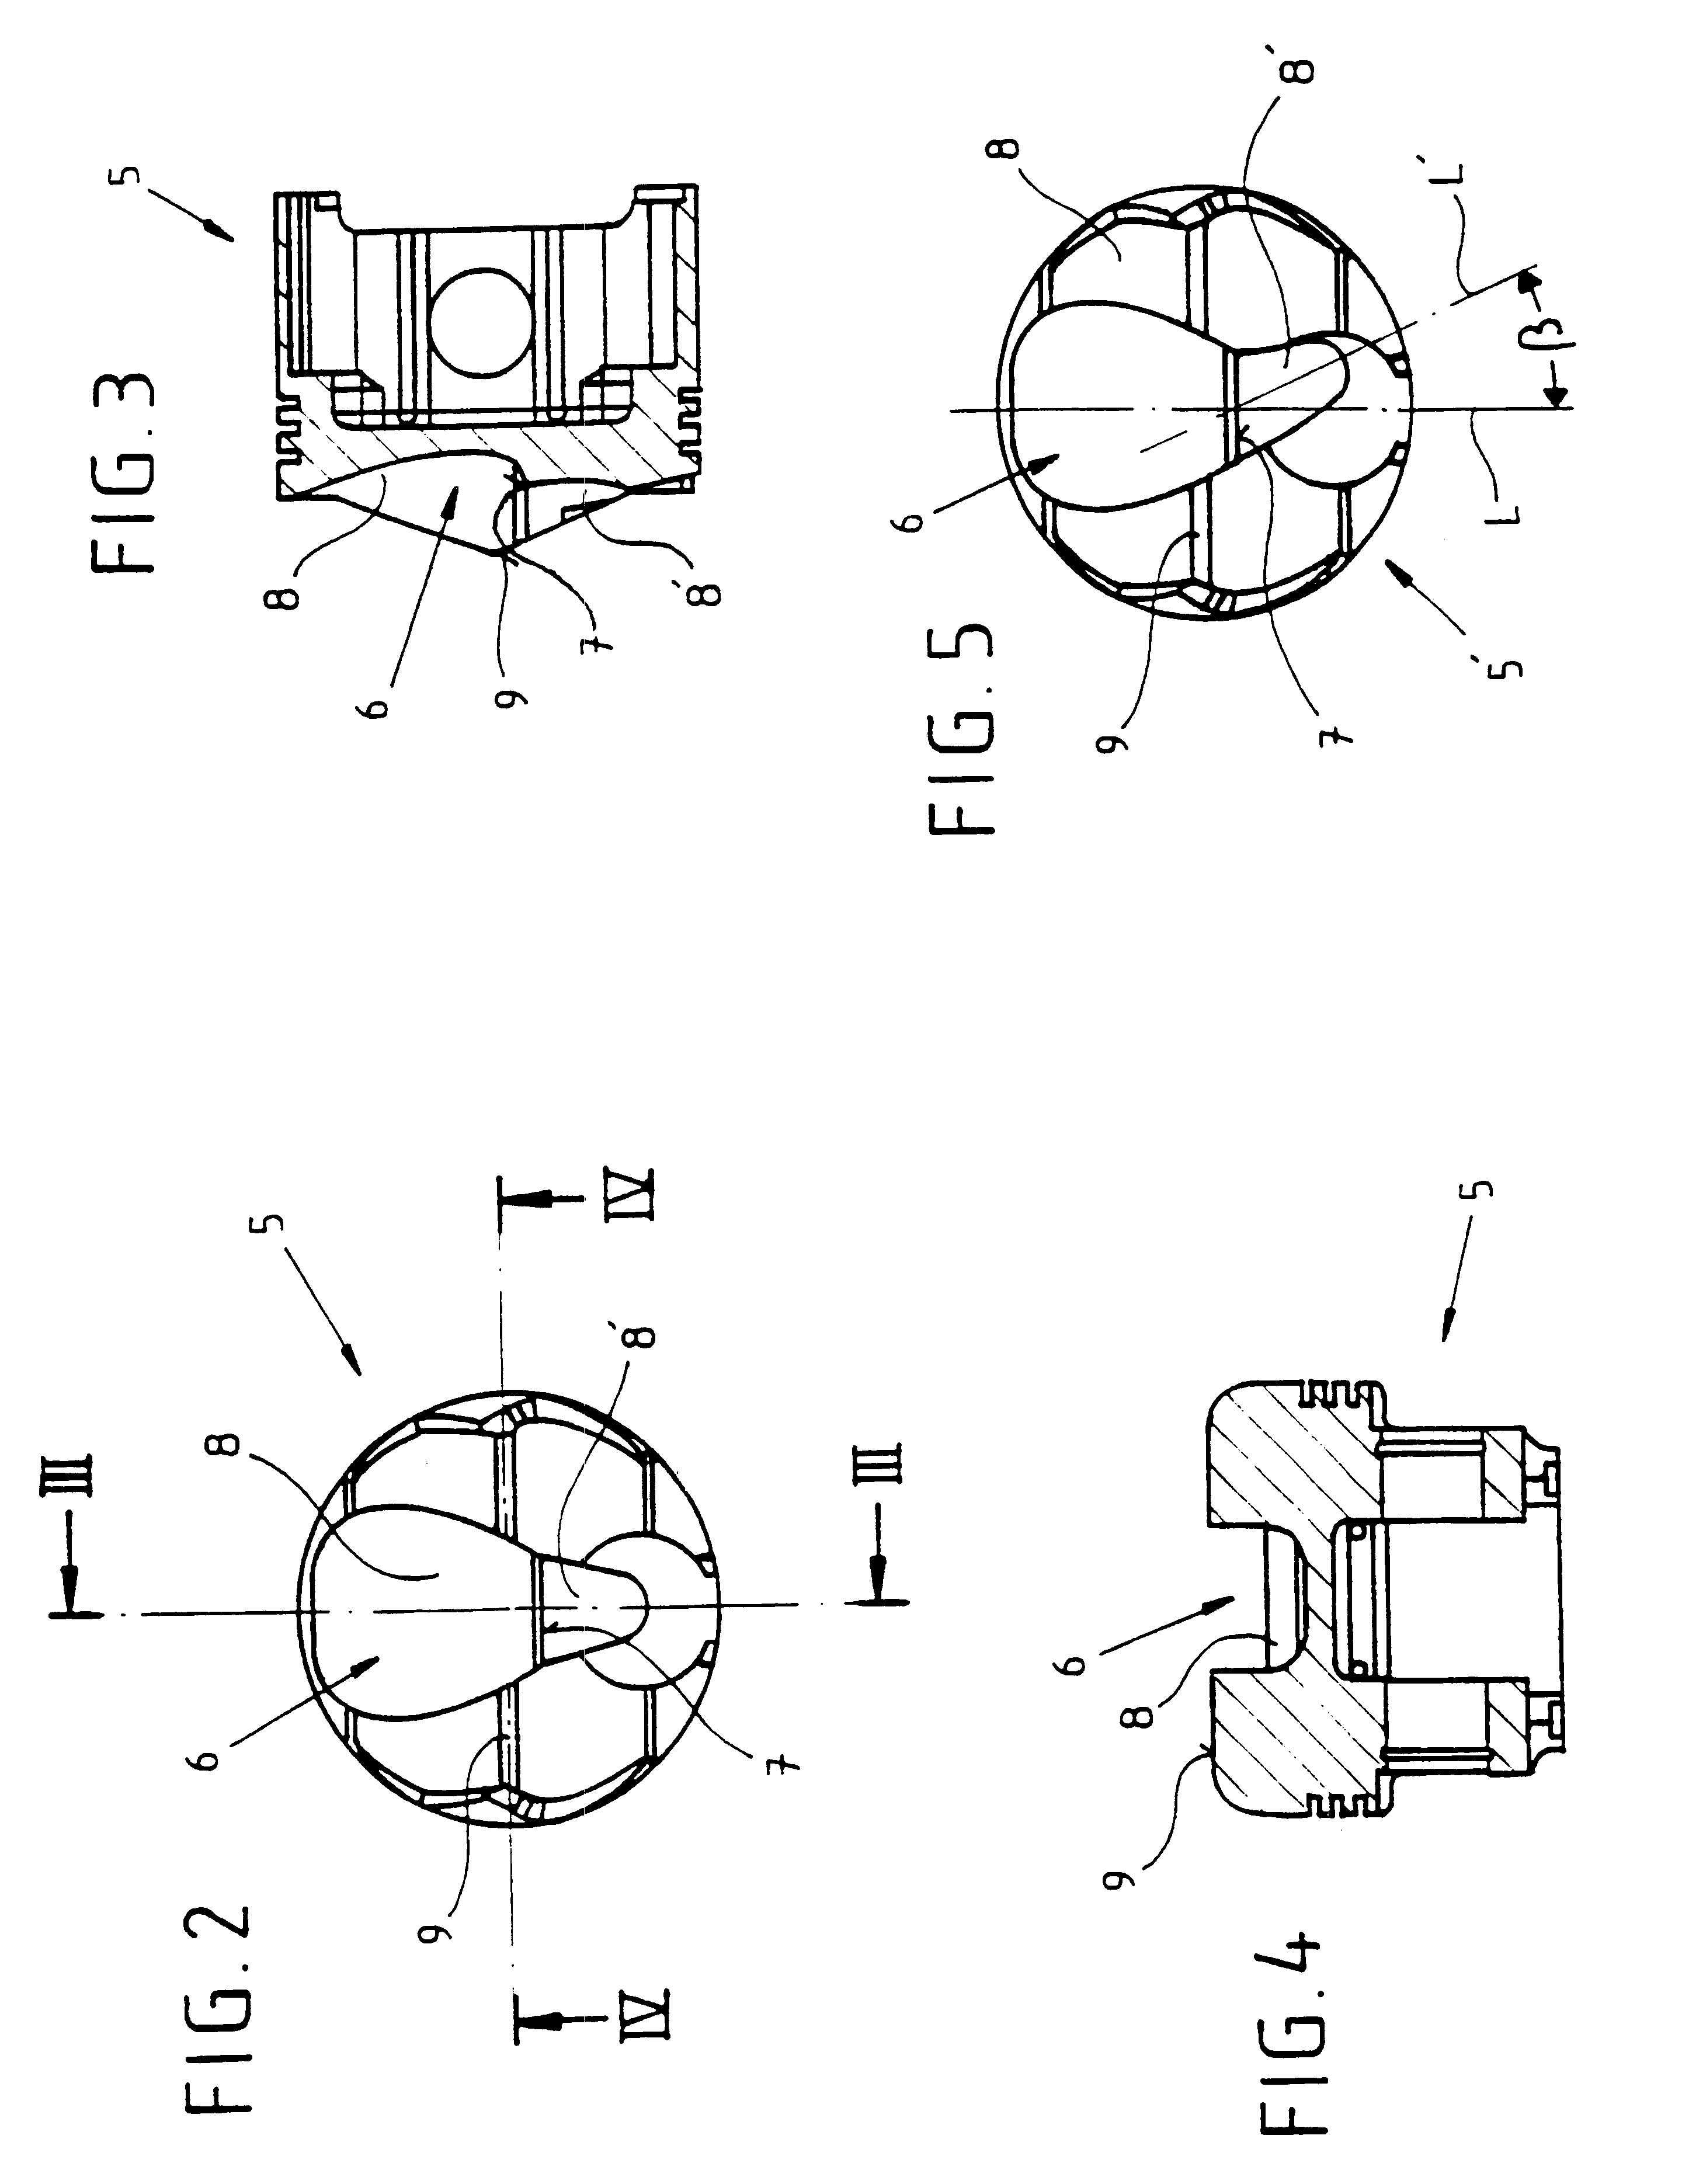 Direct injection internal combustion engine